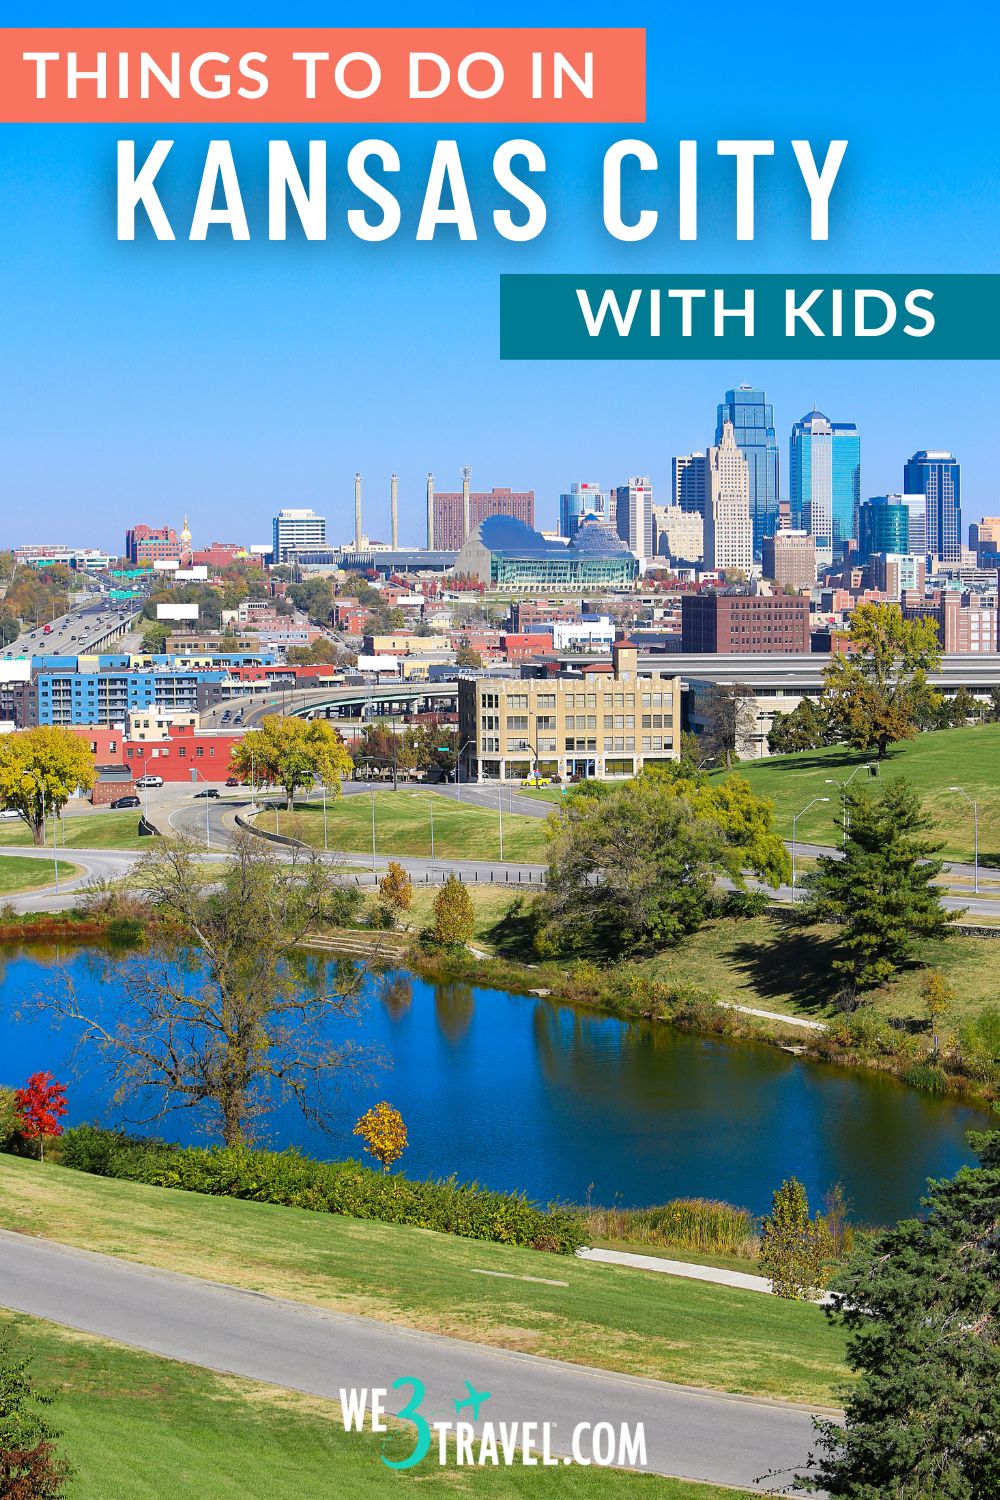 Things to do in Kansas City with kids